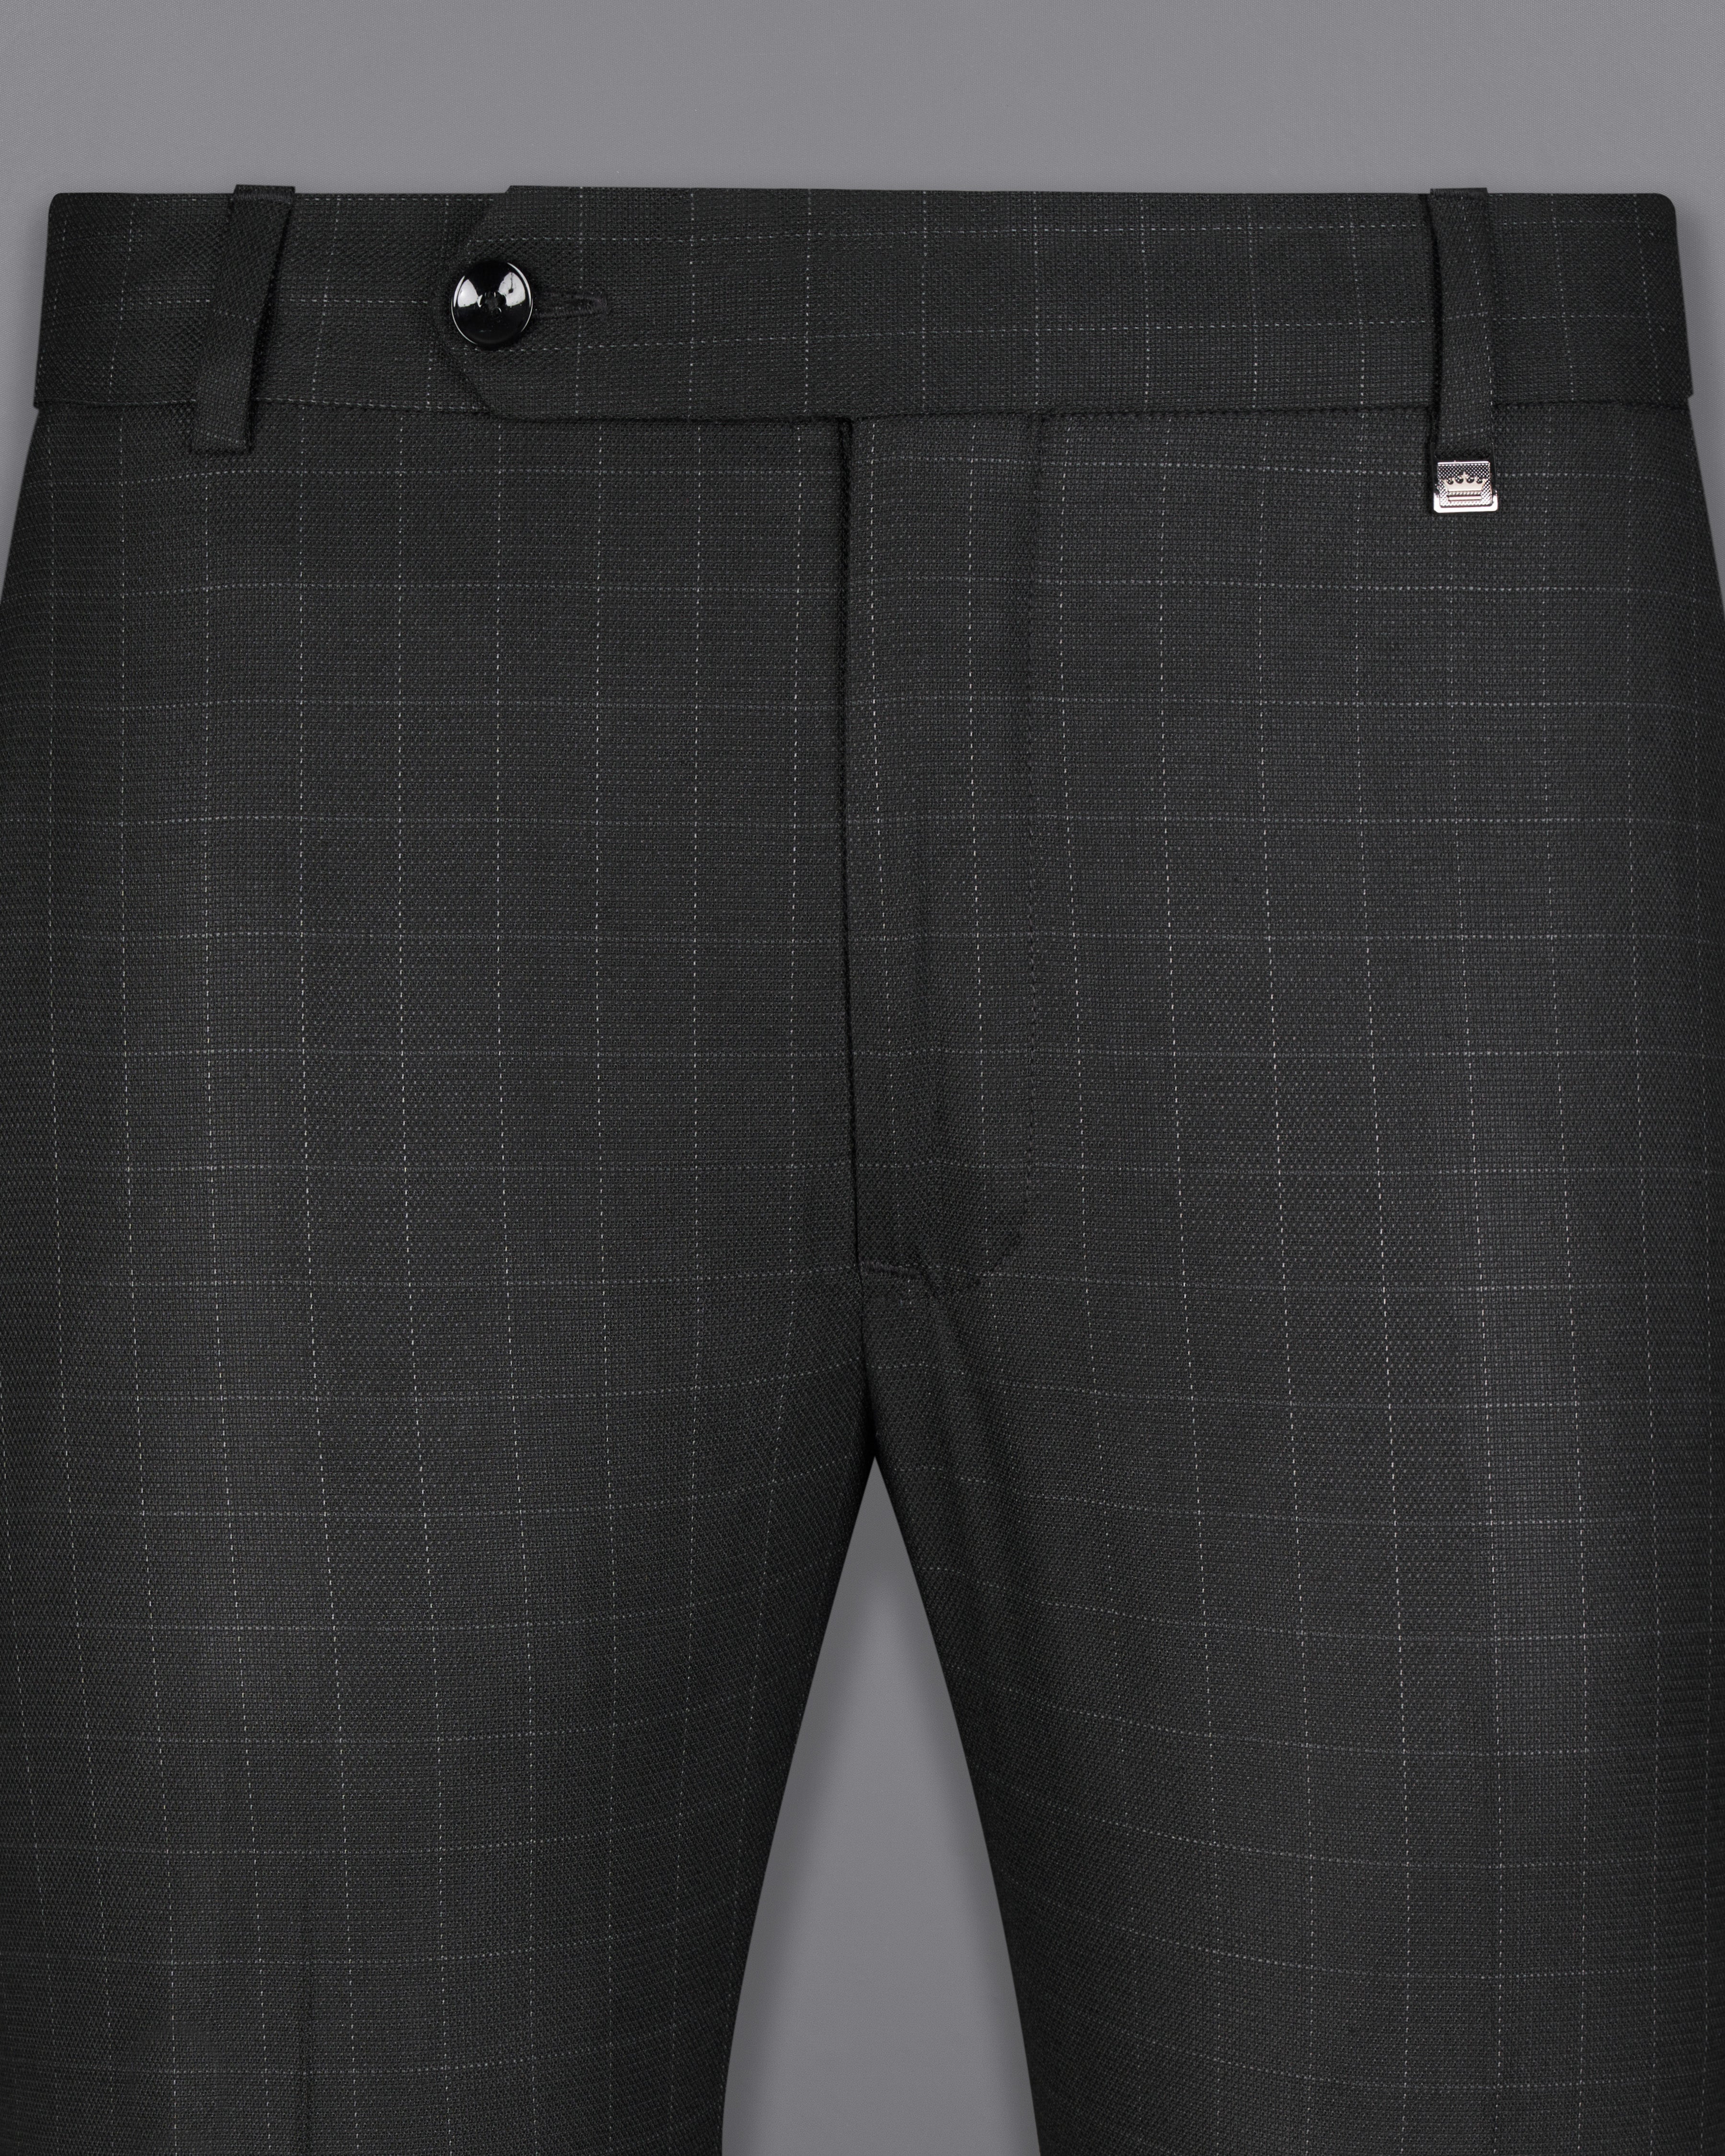 Jade Black with Storm Gray Checkered Trouser T2604-28, T2604-30, T2604-32, T2604-34, T2604-36, T2604-38, T2604-40, T2604-42, T2604-44